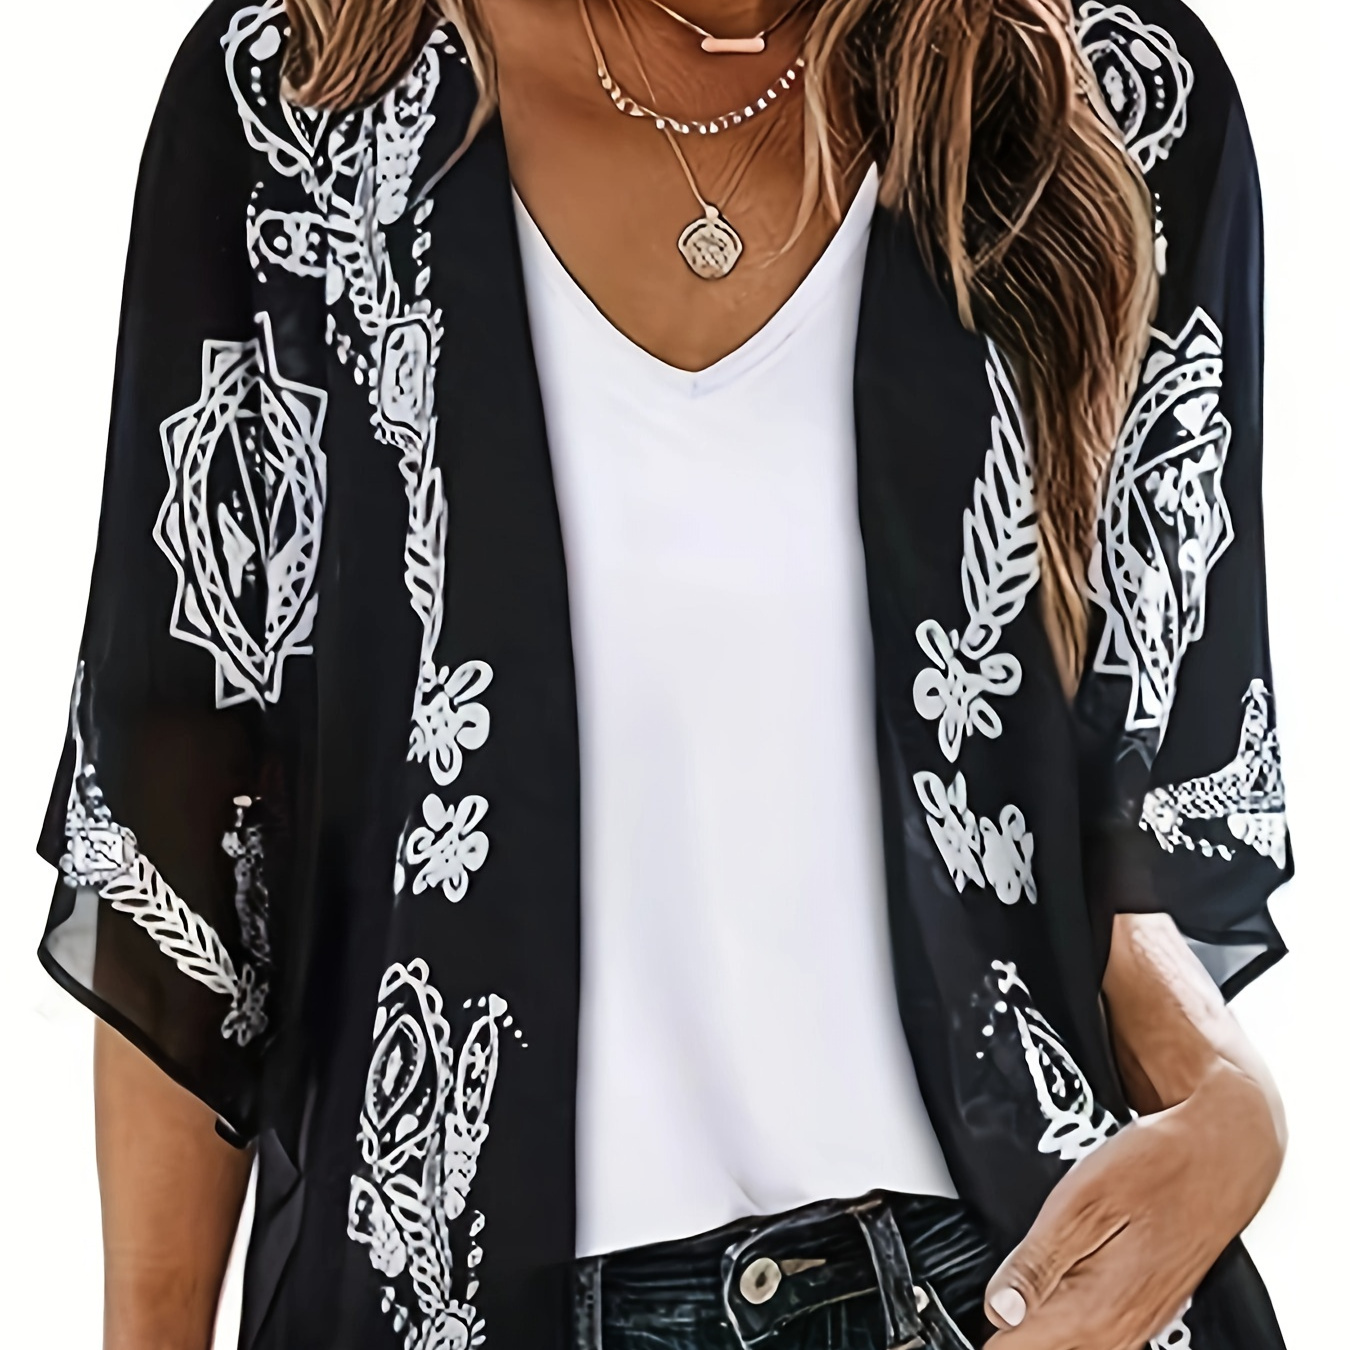 

Graphic Print Open Front Chiffon Blouse, Casual 3/4 Sleeve Coverup Blouse, Women's Clothing